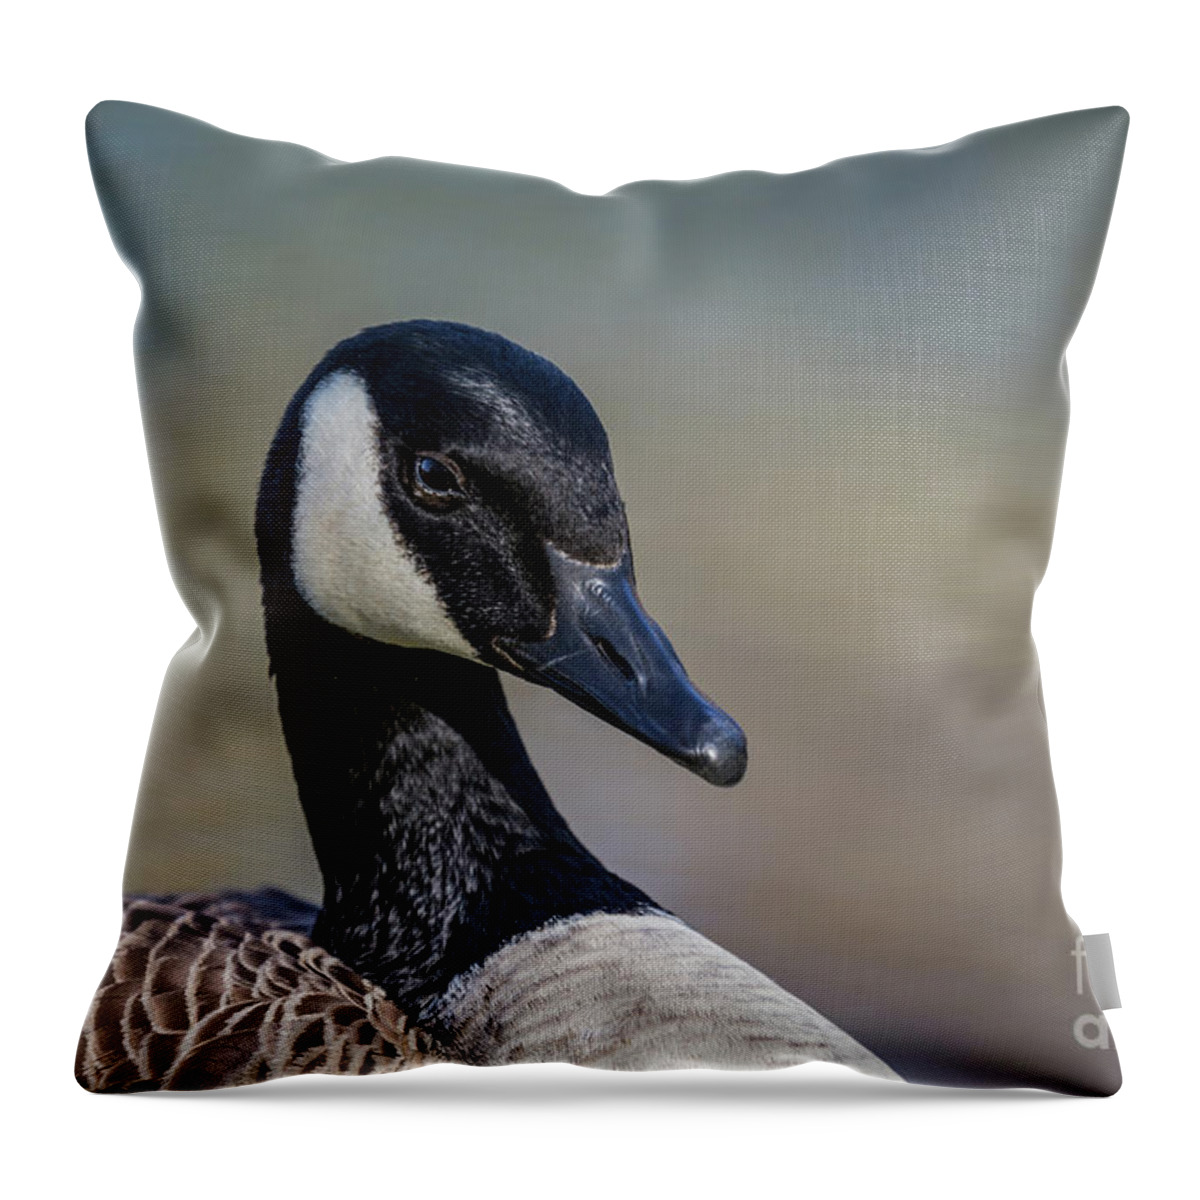 Canada Goose Throw Pillow featuring the photograph Canada Goose Portrait by Eva Lechner